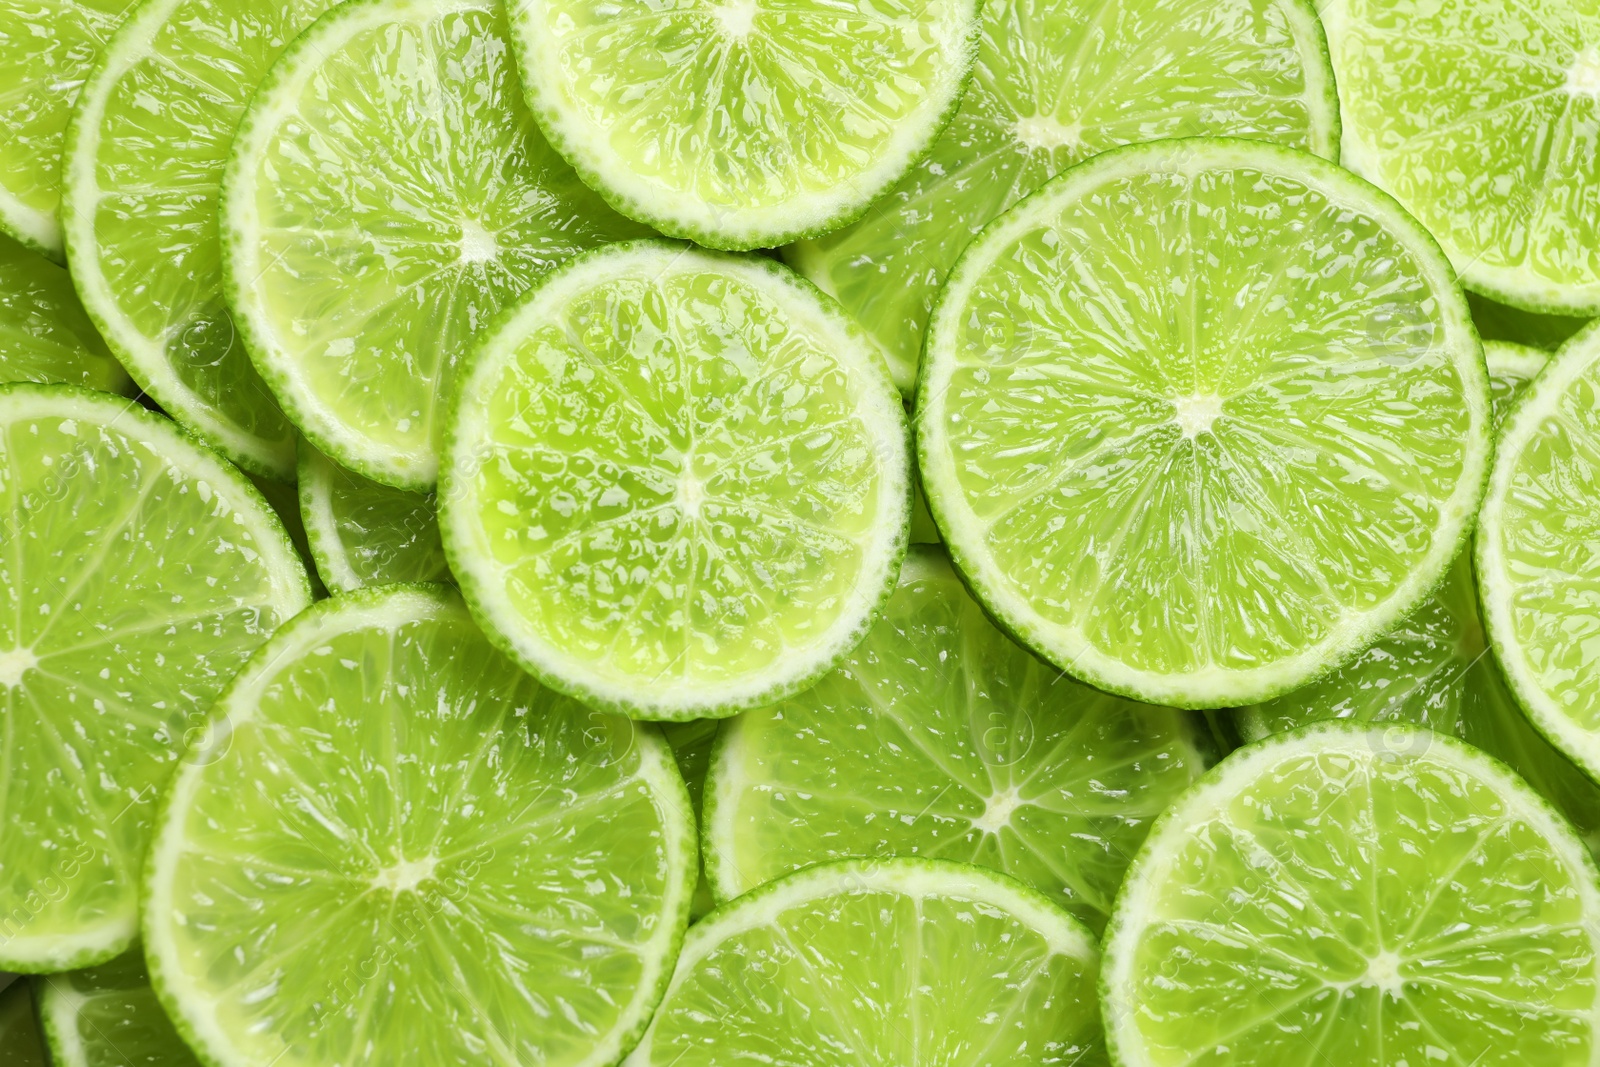 Photo of Fresh sliced ripe limes as background, top view